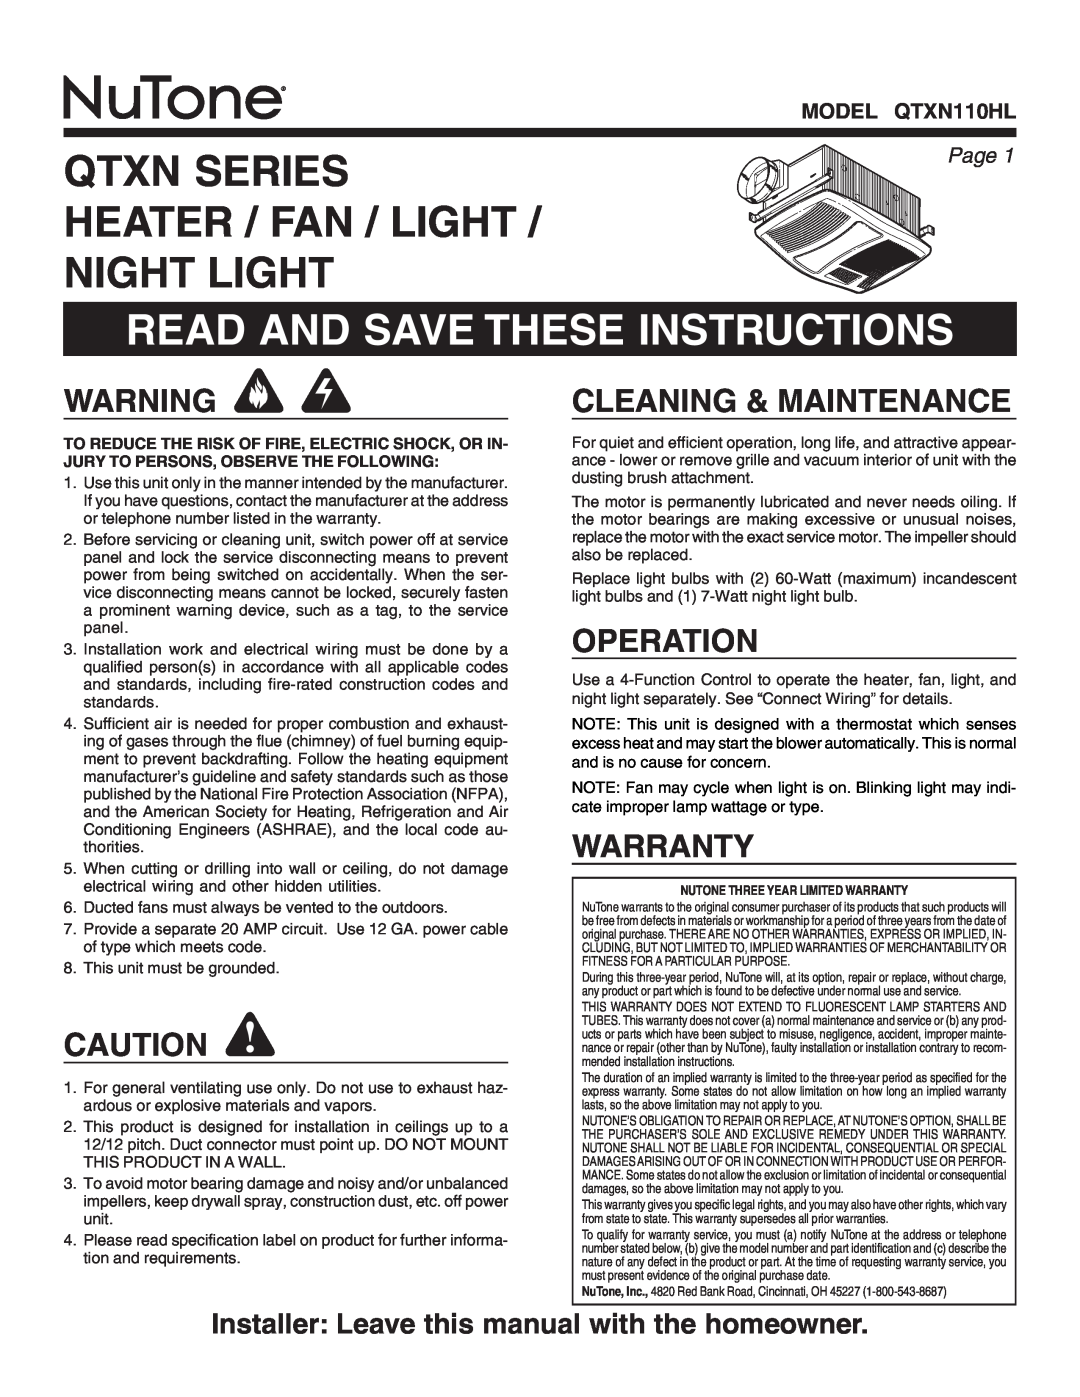 NuTone QTXN110HL warranty Qtxn Series Heater / Fan / Light / Night Light, Read And Save These Instructions, Operation 